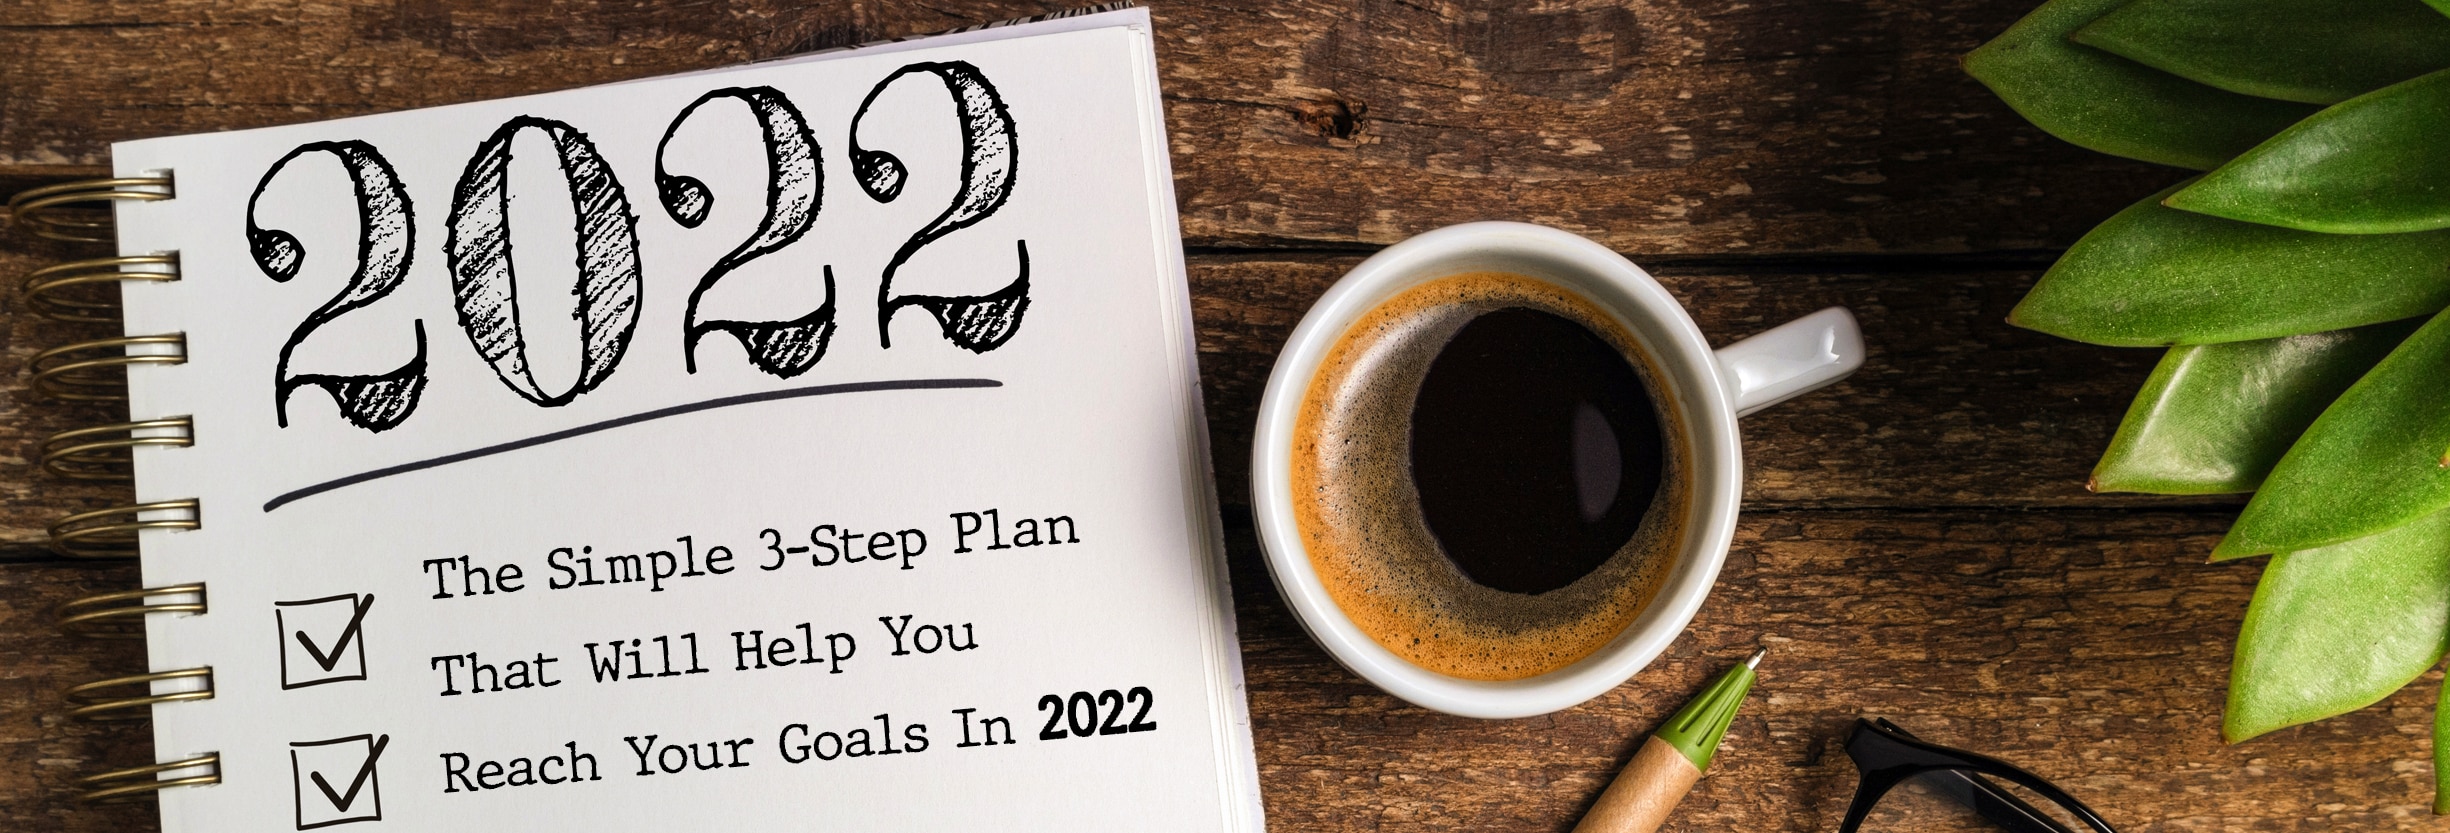 The Simple 3-Step Plan That Will Help You Reach Your Goals In 2022